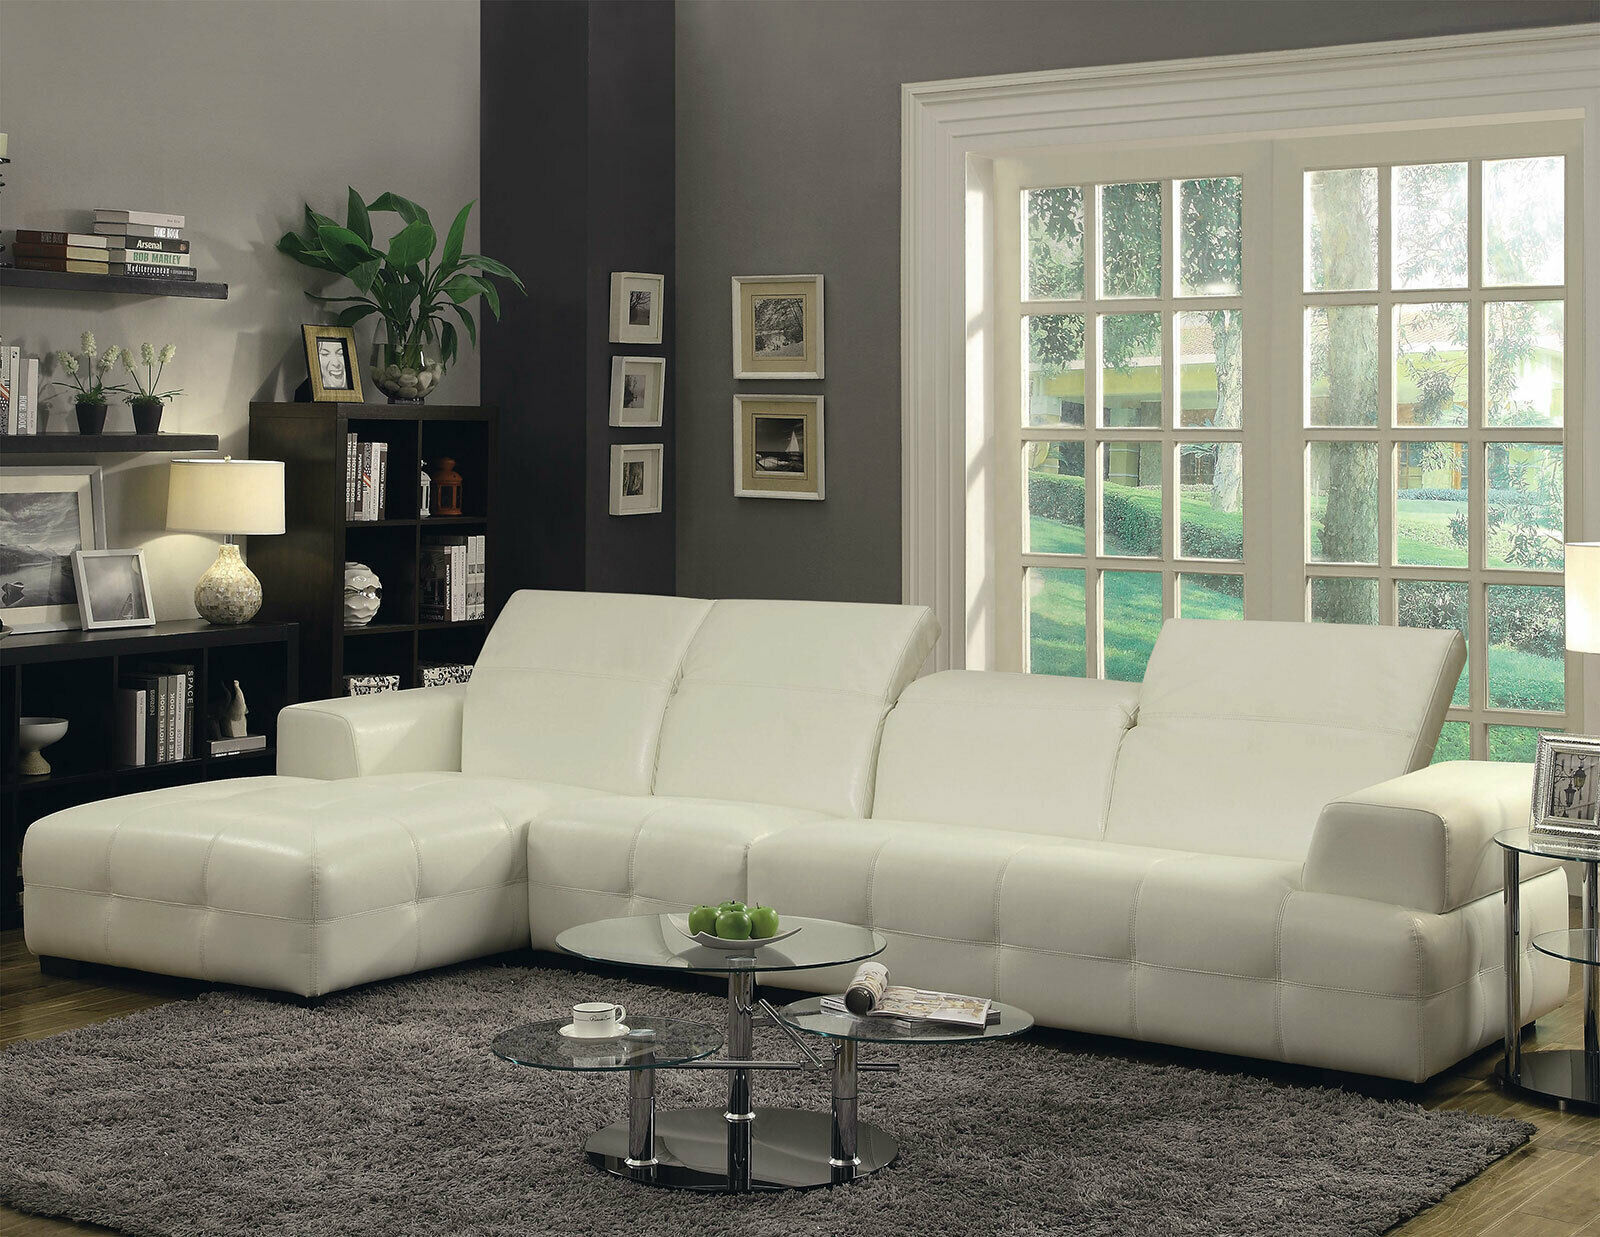 AMARA Contemporary Sectional Living Room Furniture White ...